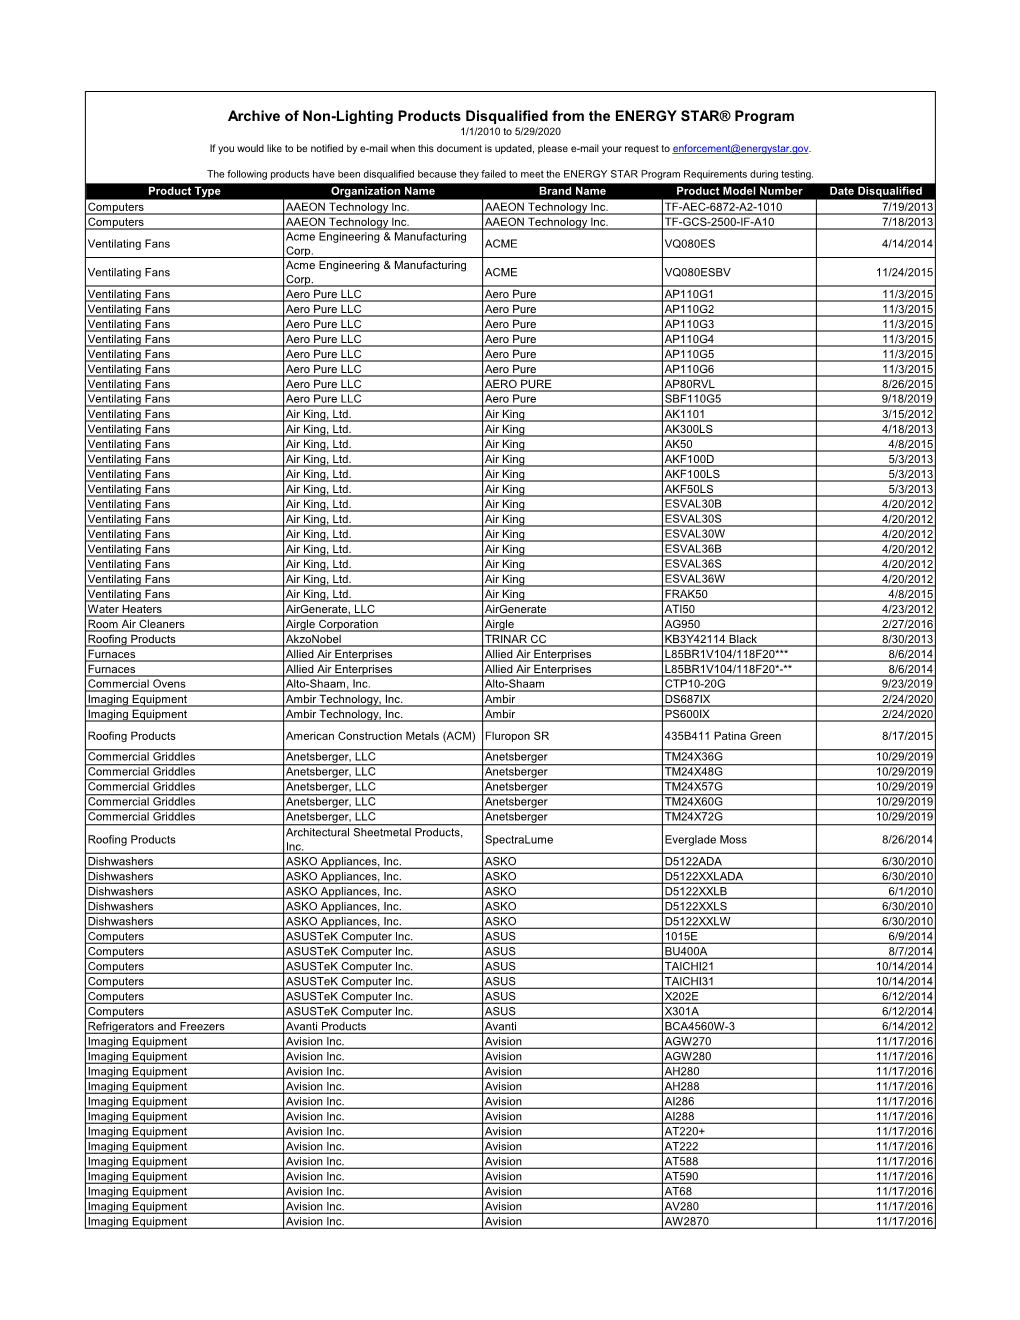 Archived List of Non-Lighting Products Disqualified from ENERGY STAR